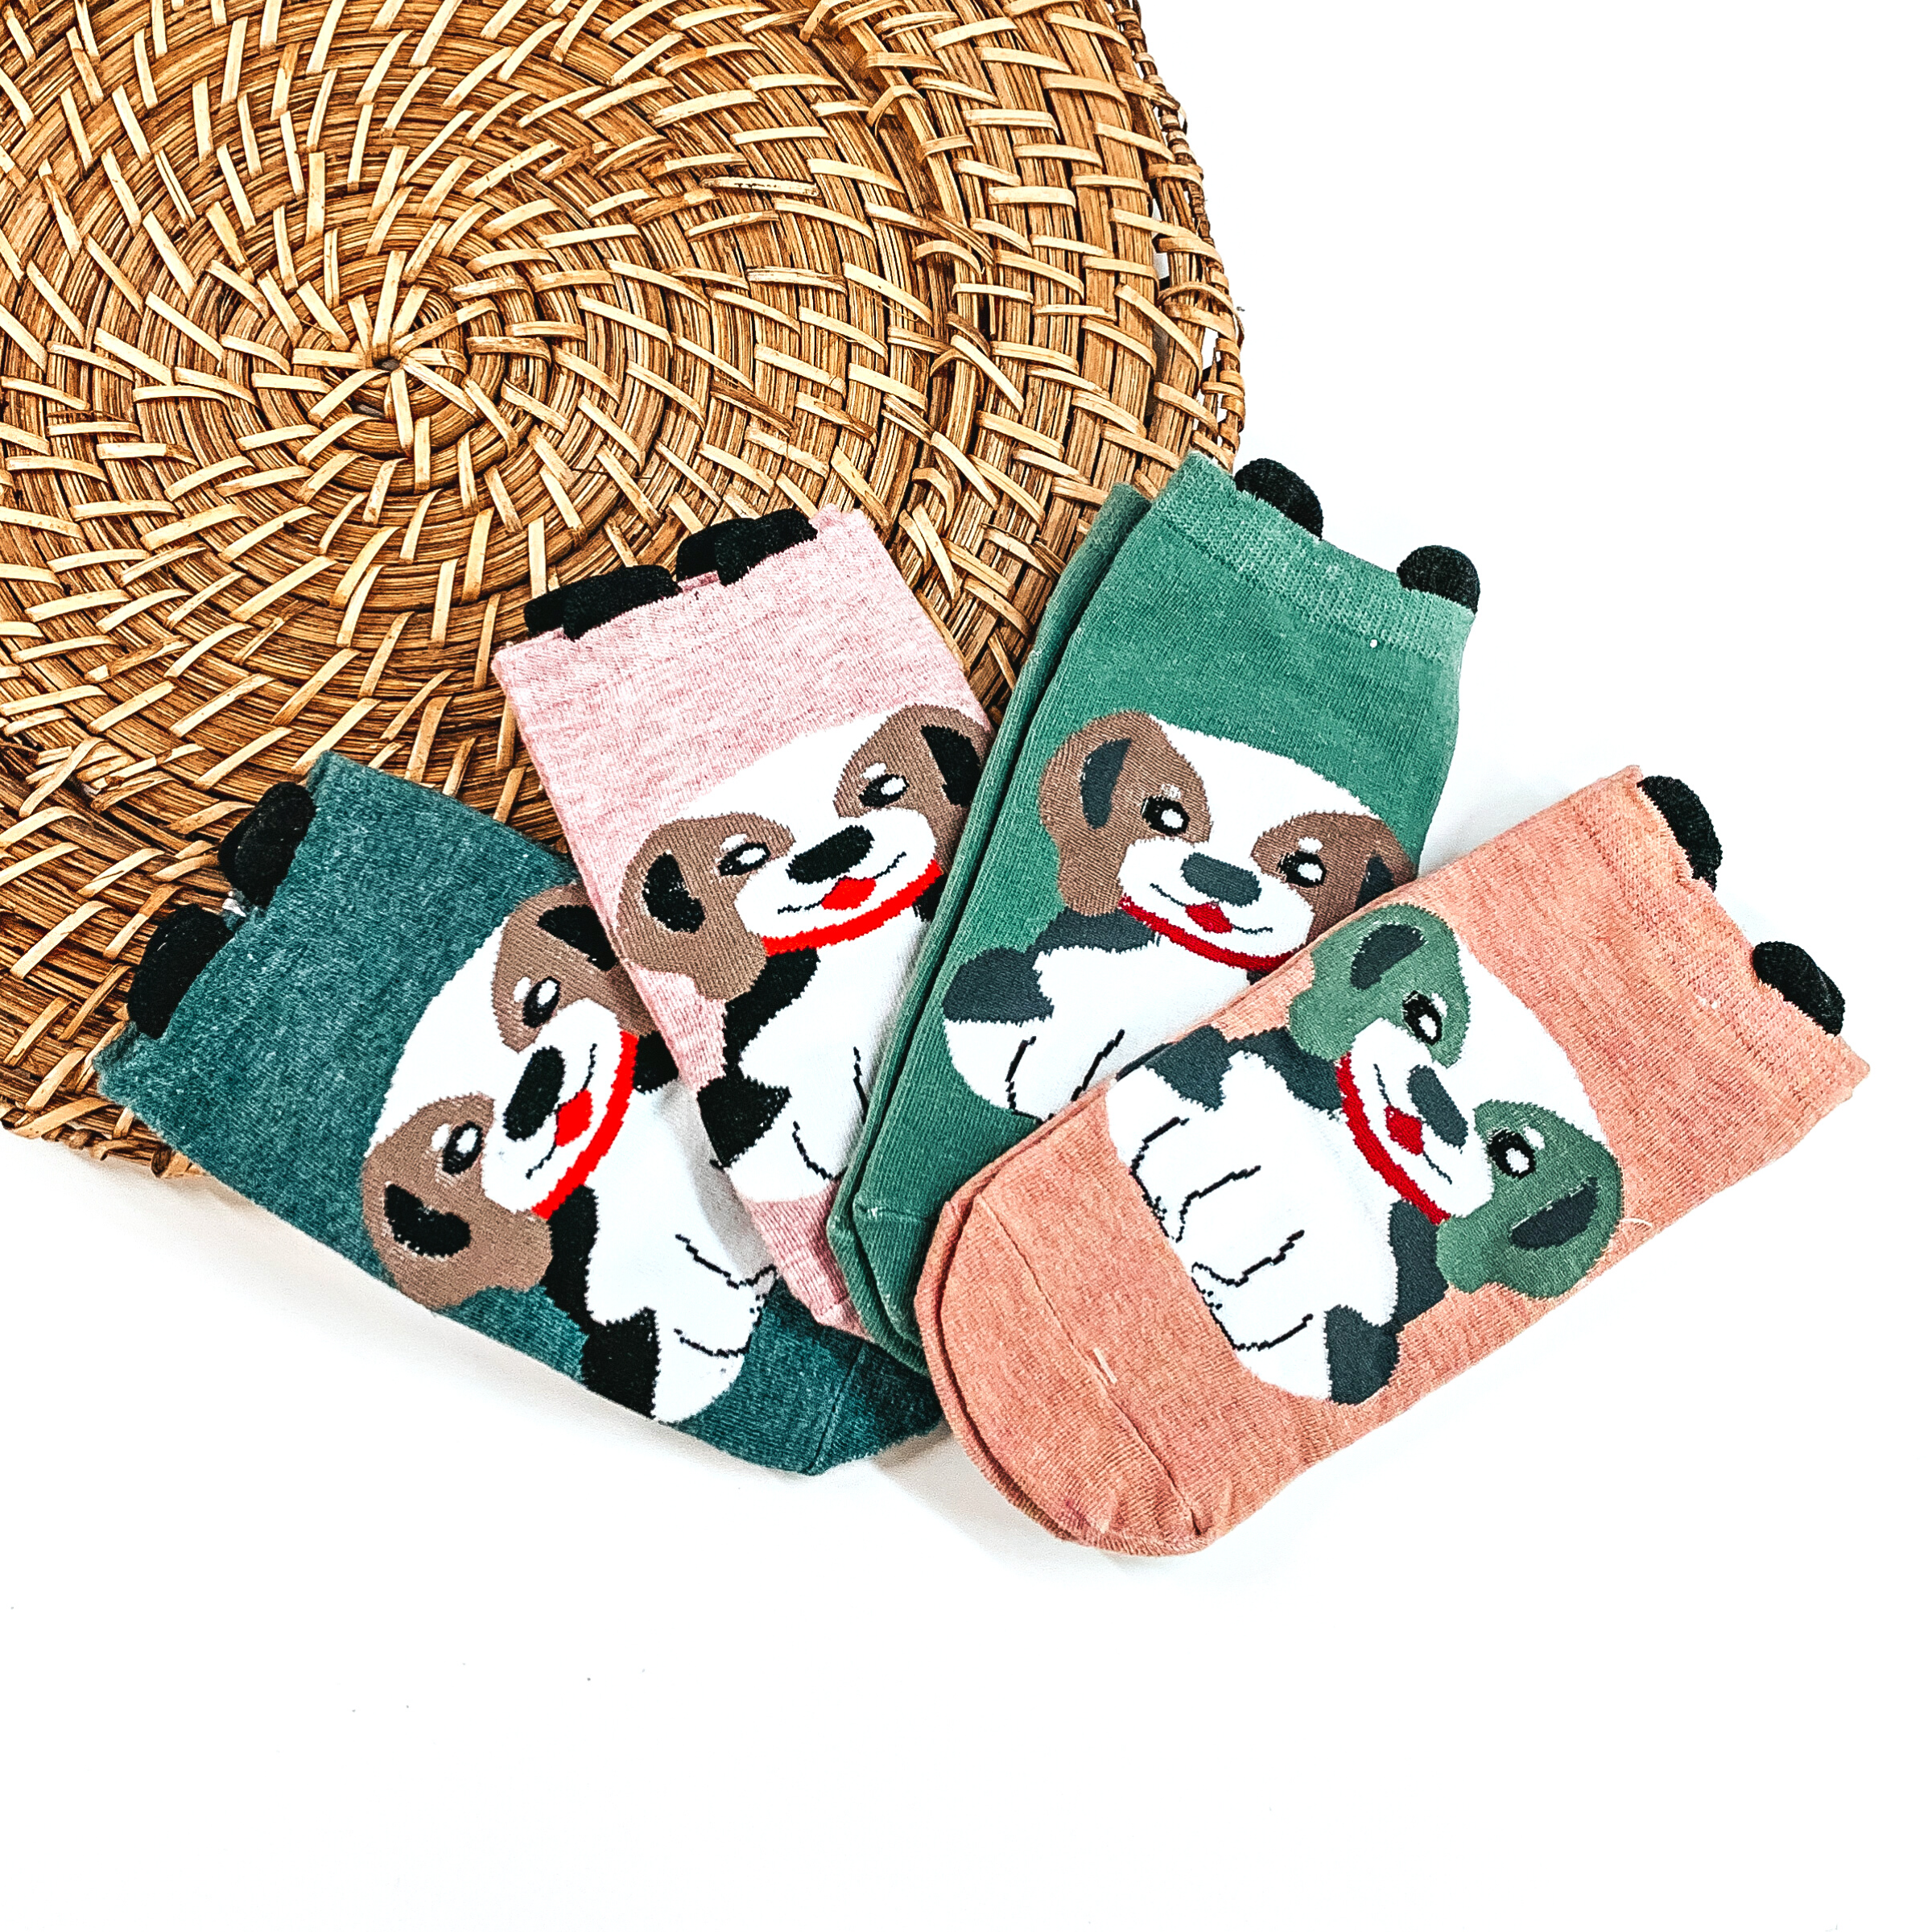 There are four pairs of socks with a Beagle dog on the center and they have small  black 'ears' on the top. From left to right; dark green with a brown/white Beagle  and a red collar, light pink with a brown/white Beagle and a red collar, green with  a brown/white Beagle and a red collar, and then coral with a green/white Beagle with  a red collar. These pair of socks are taken on a brown woven slate and on a white  background.